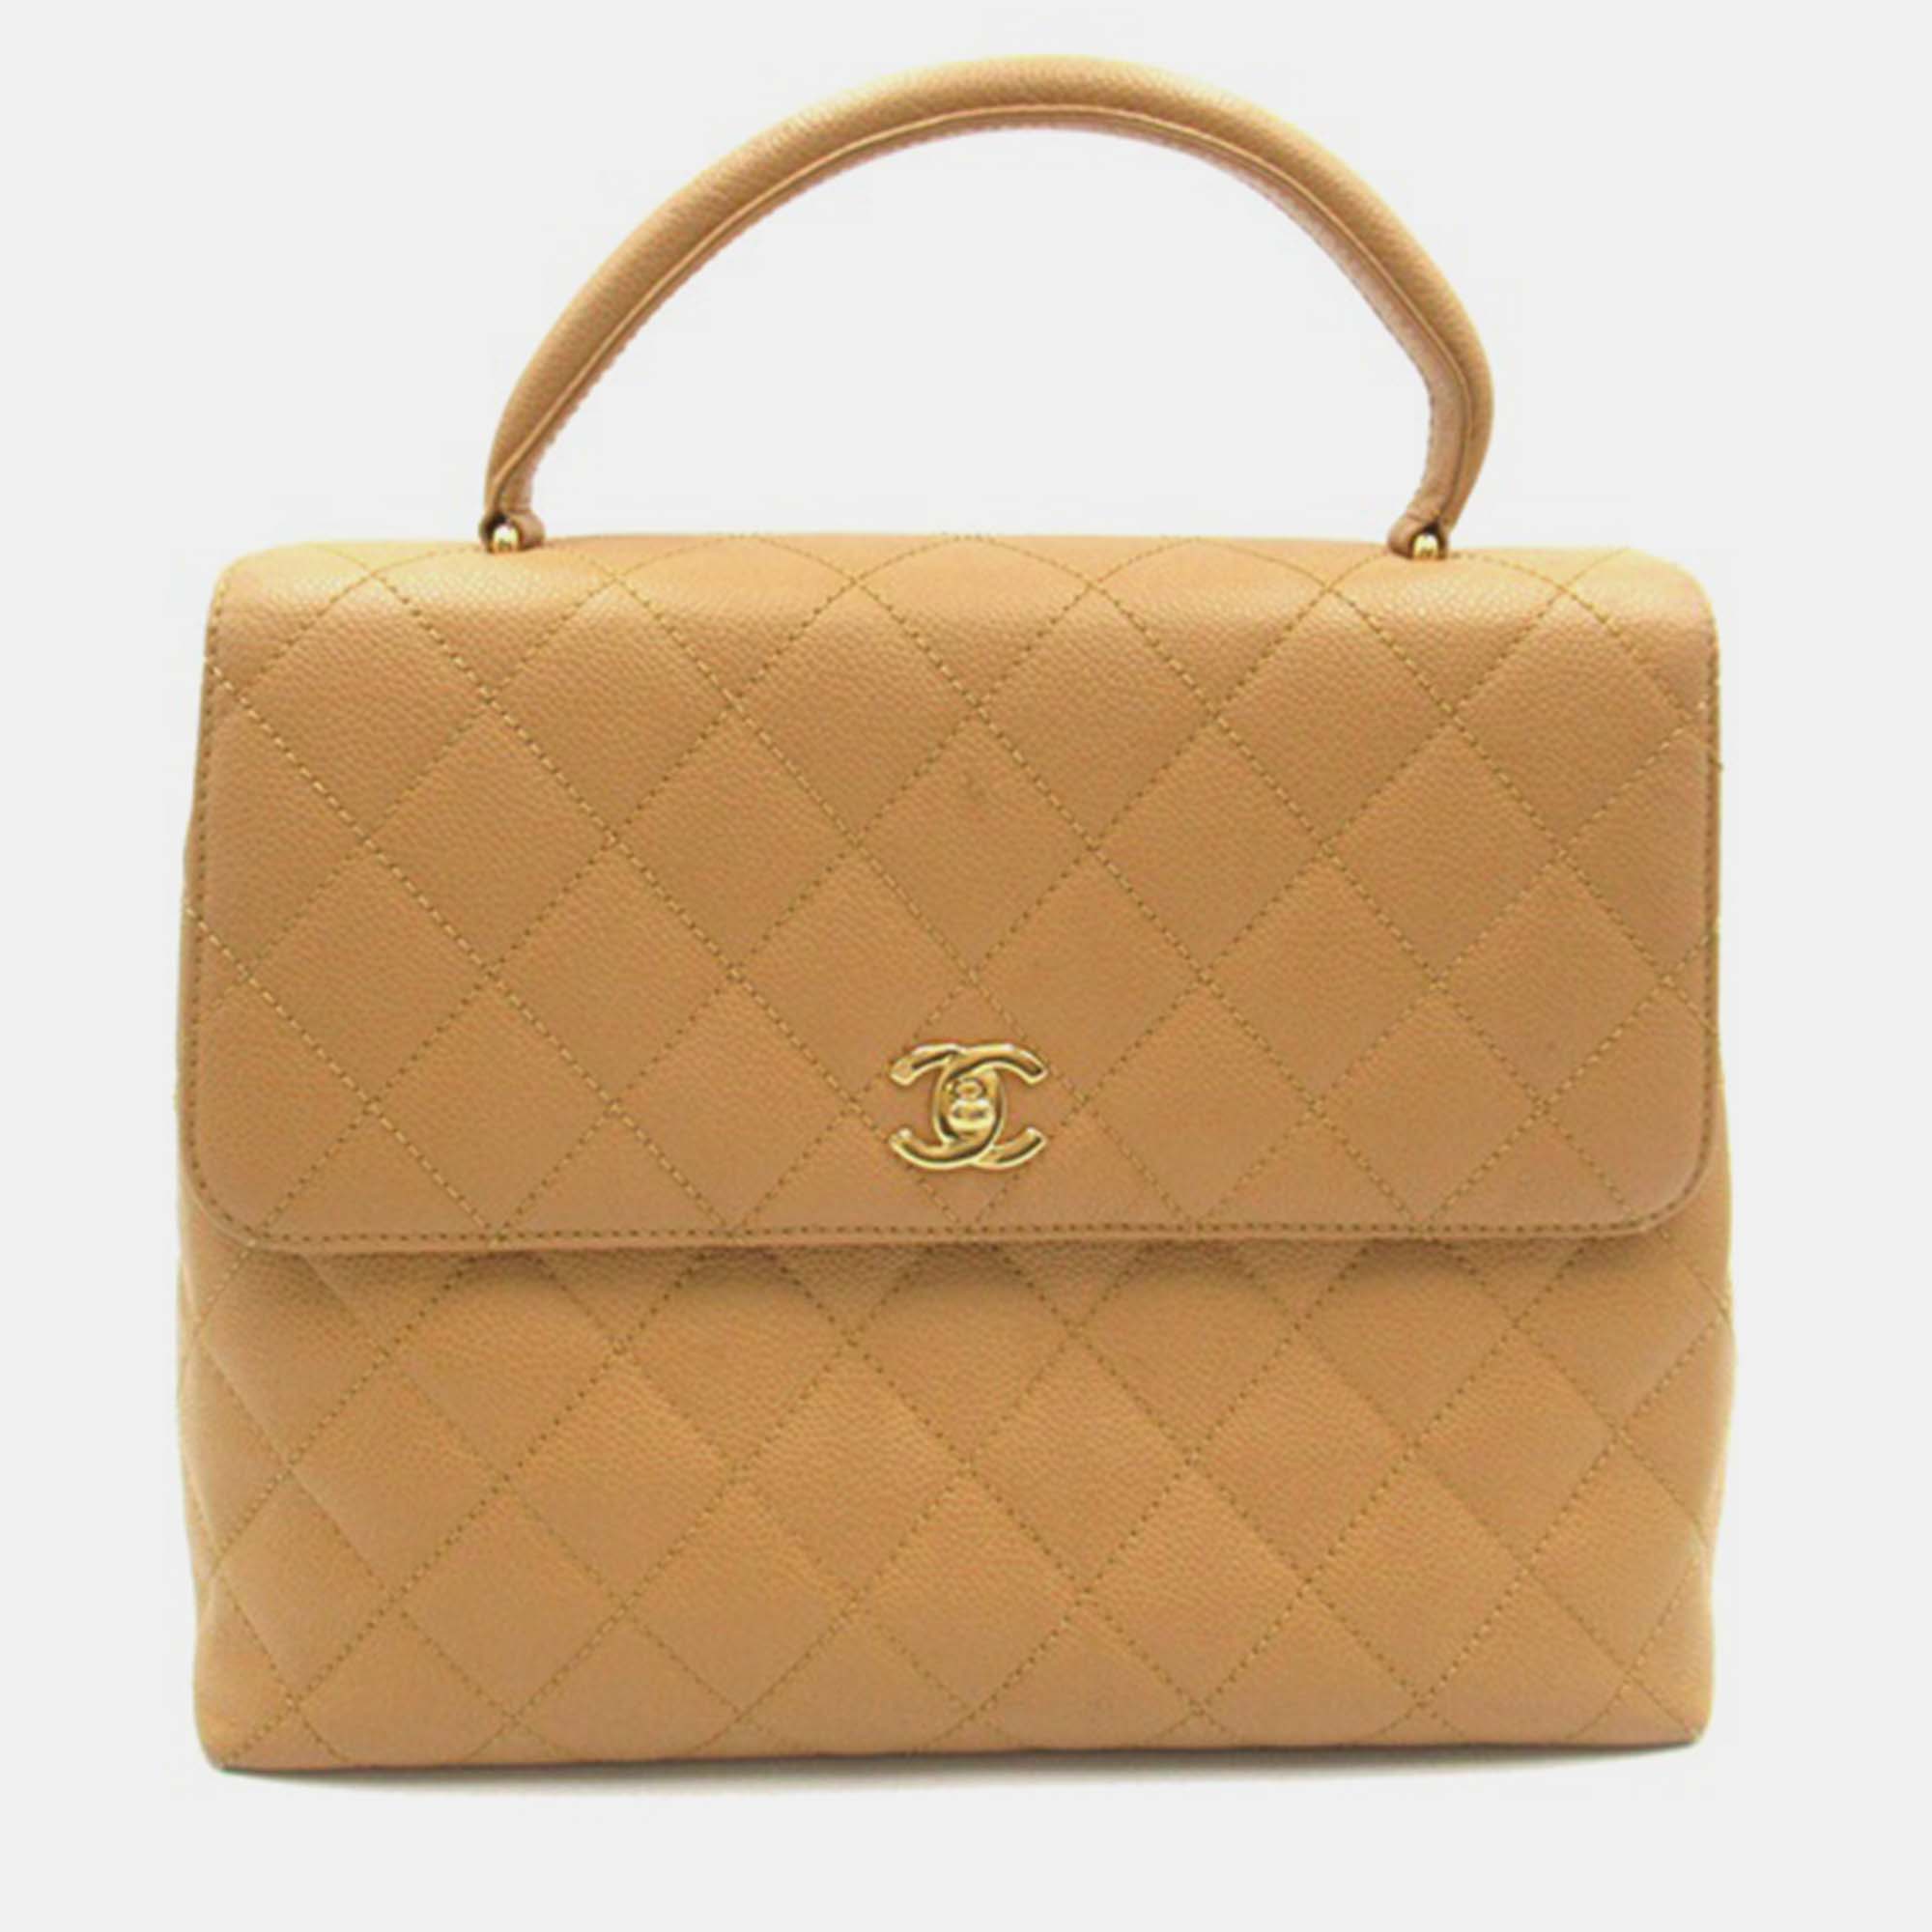 Chanel beige leather small kelly top handle bags